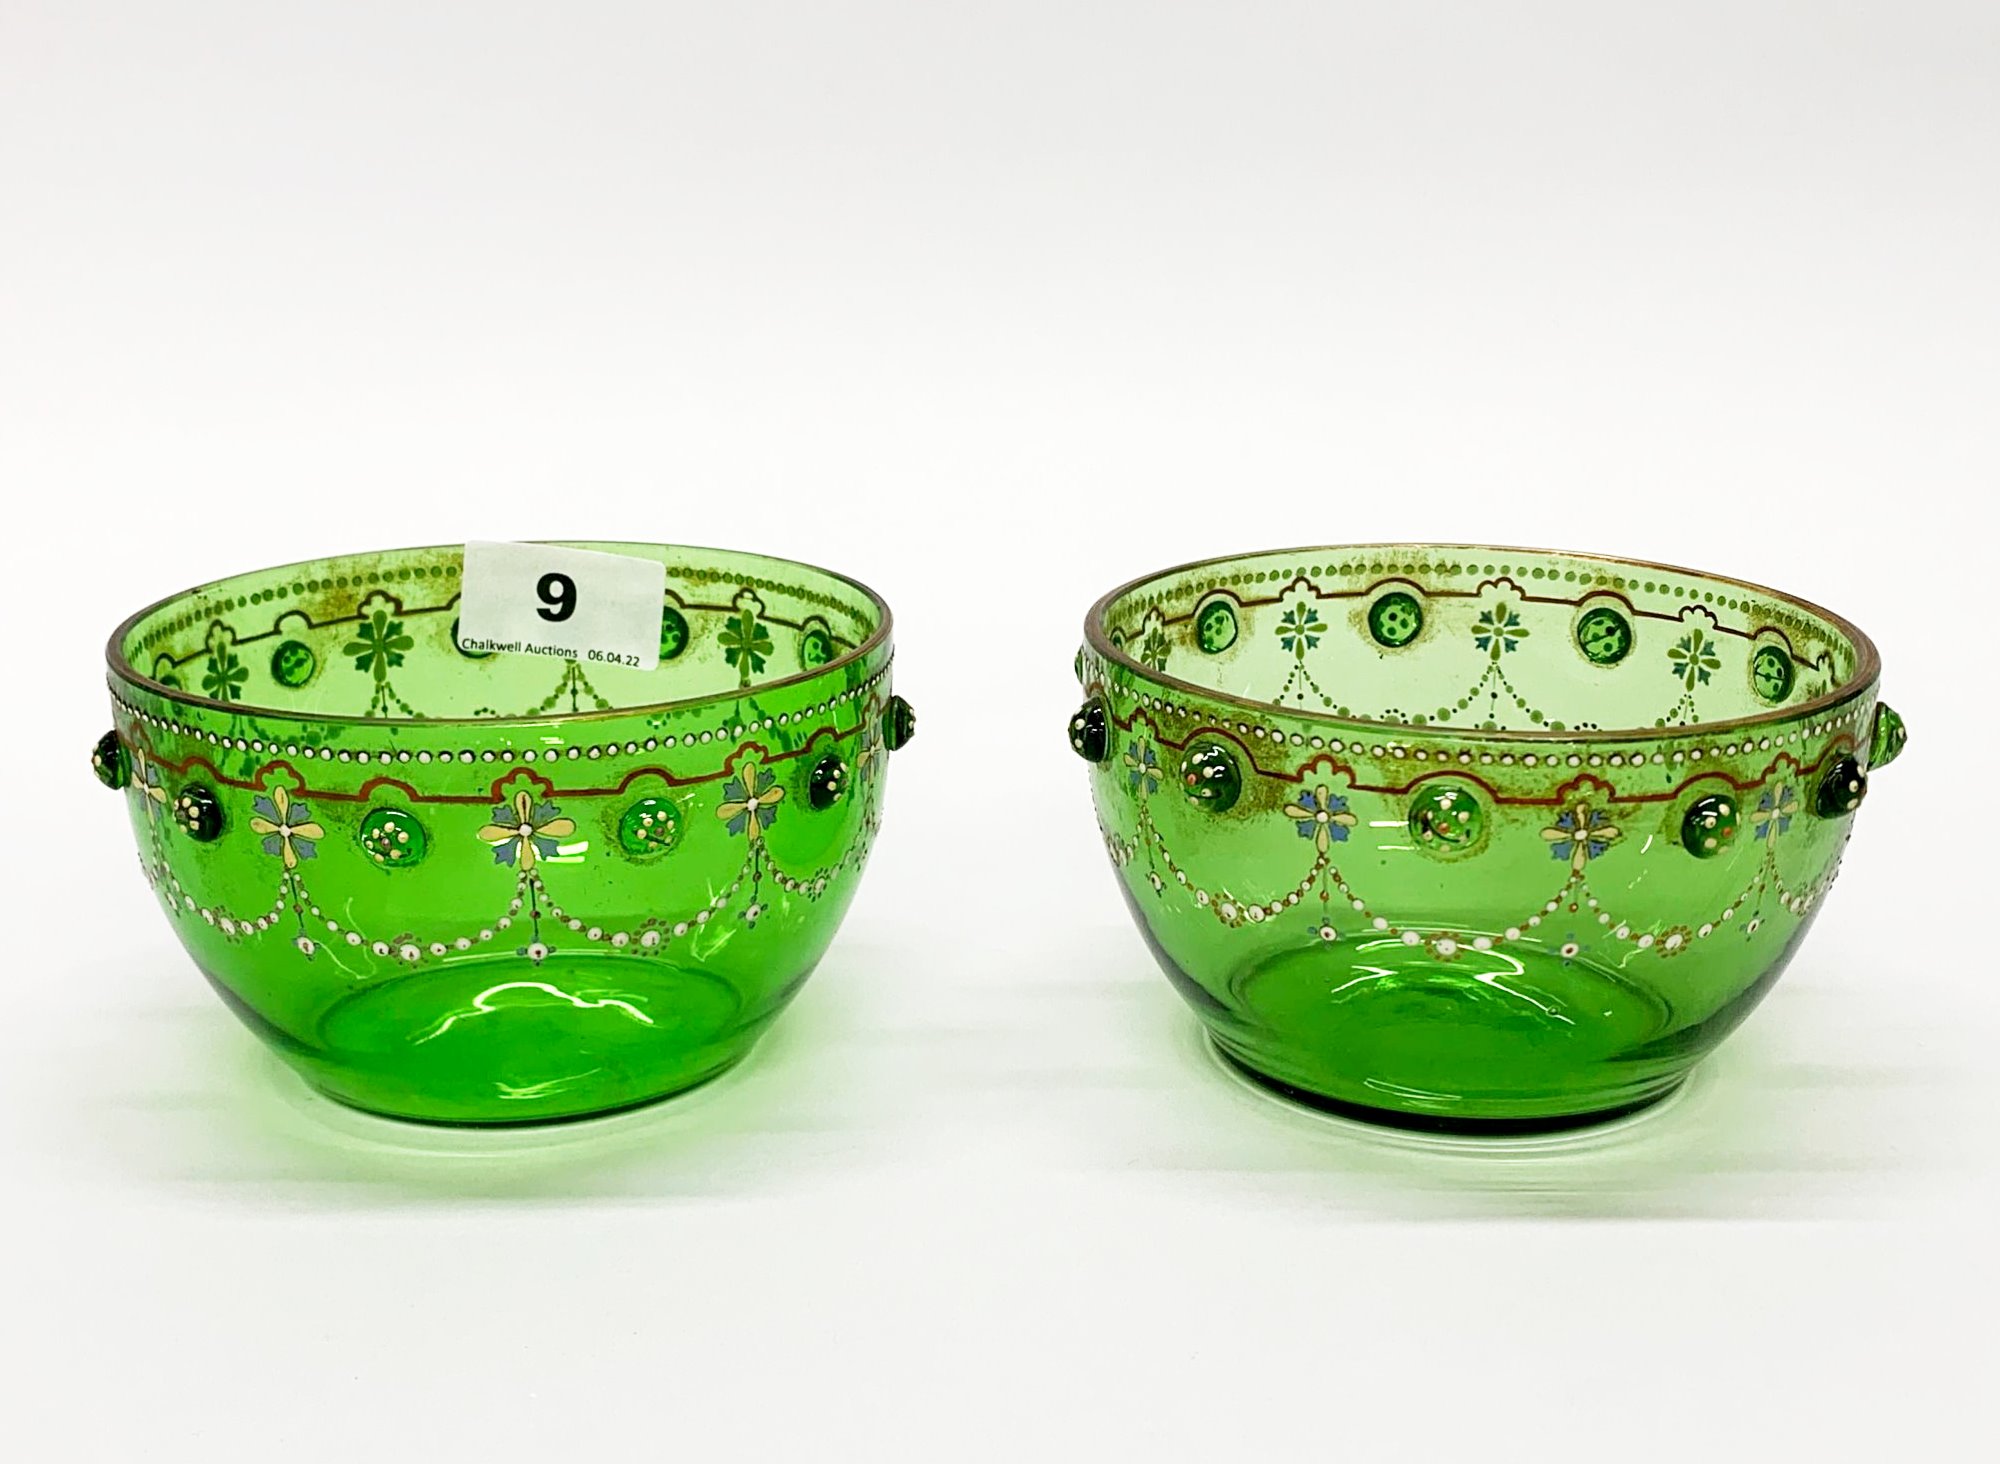 A lovely pair of 19th century 'beaded' glass bowls, Dia. 12.5cm H. 7.5cm.